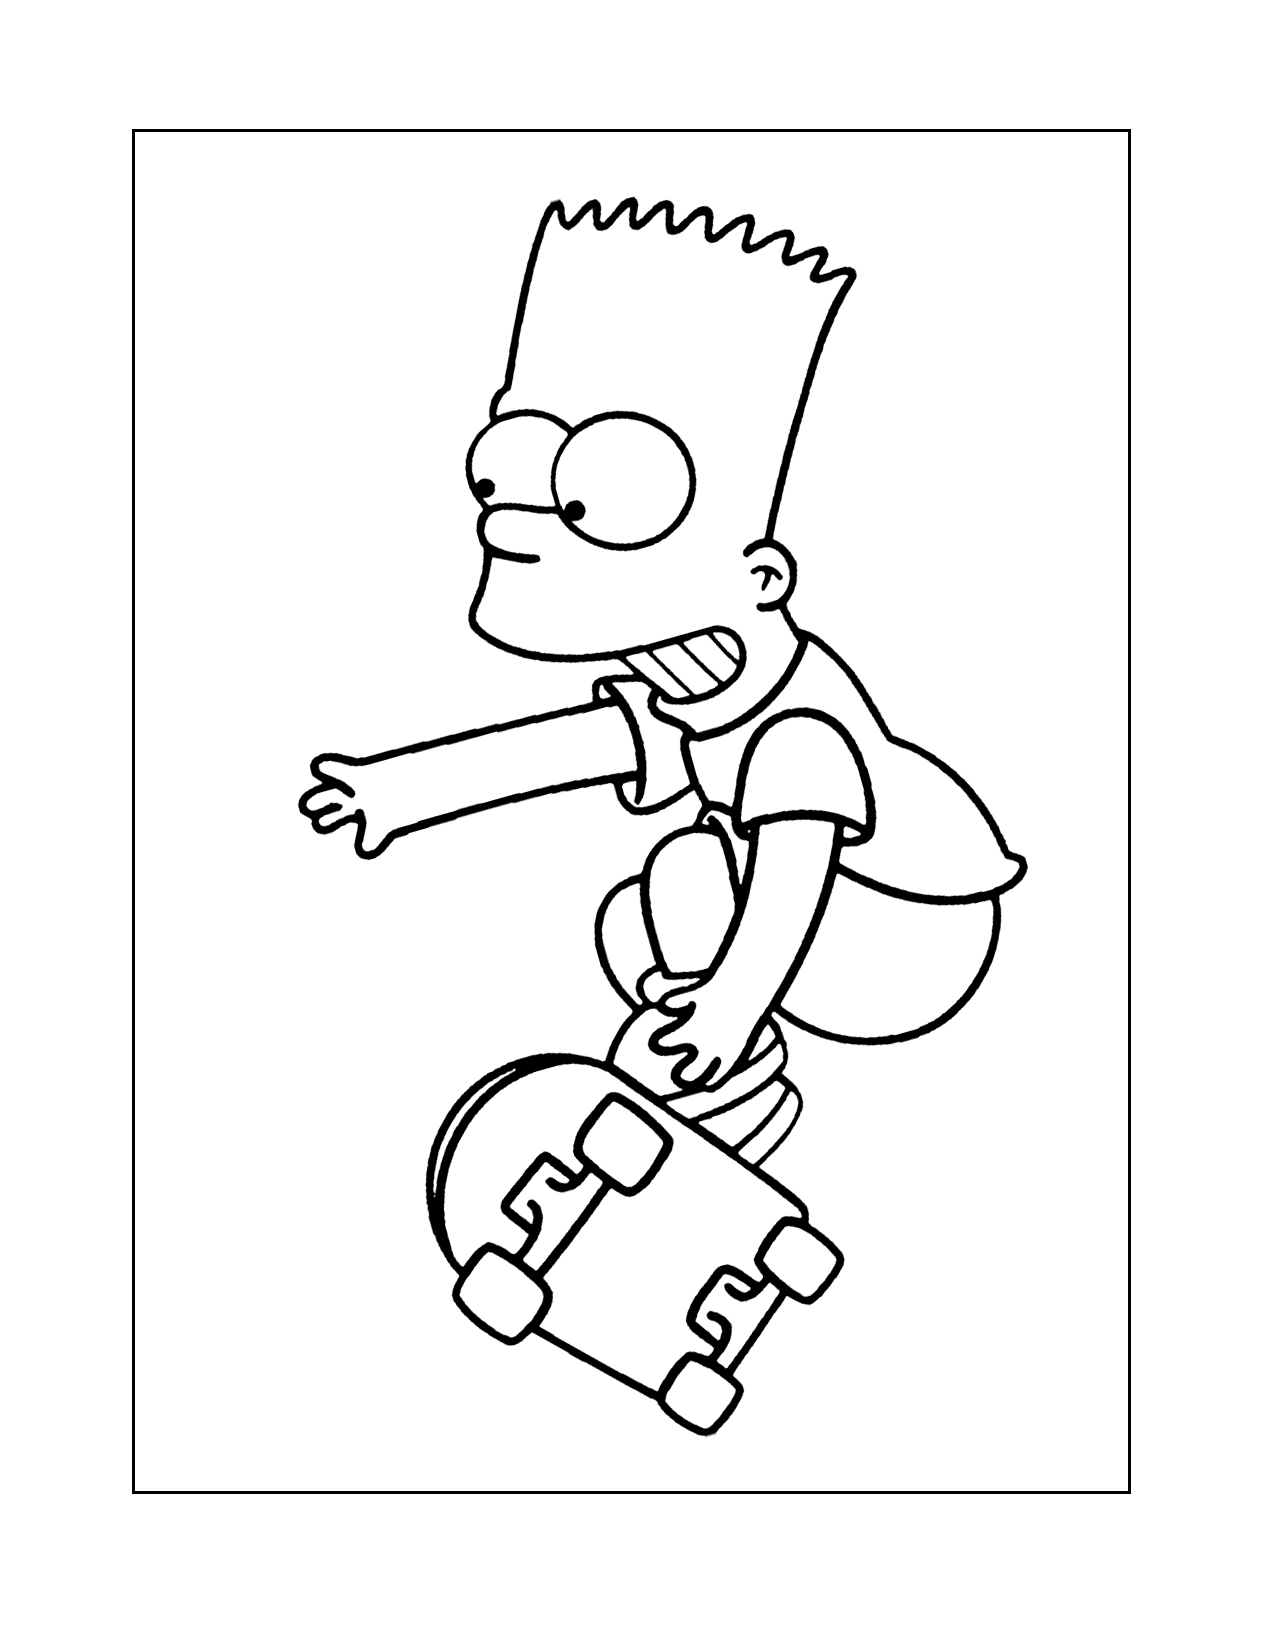 Bart Simpson Ollying A Skateboard Coloring Page